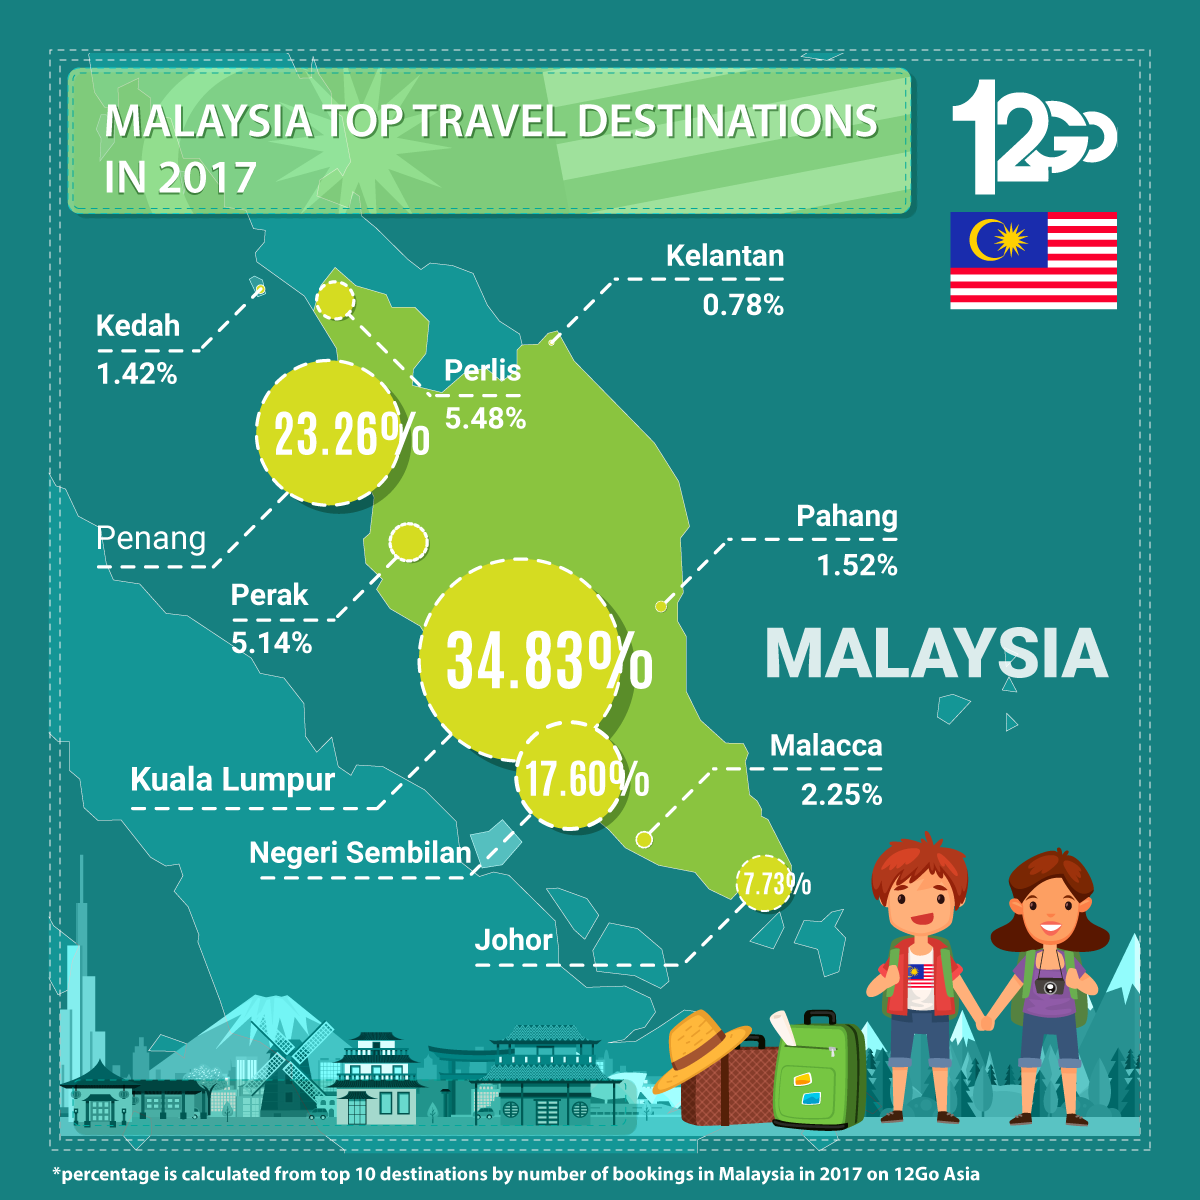 Malaysia Top Travel Destinations in 2017 Infographic